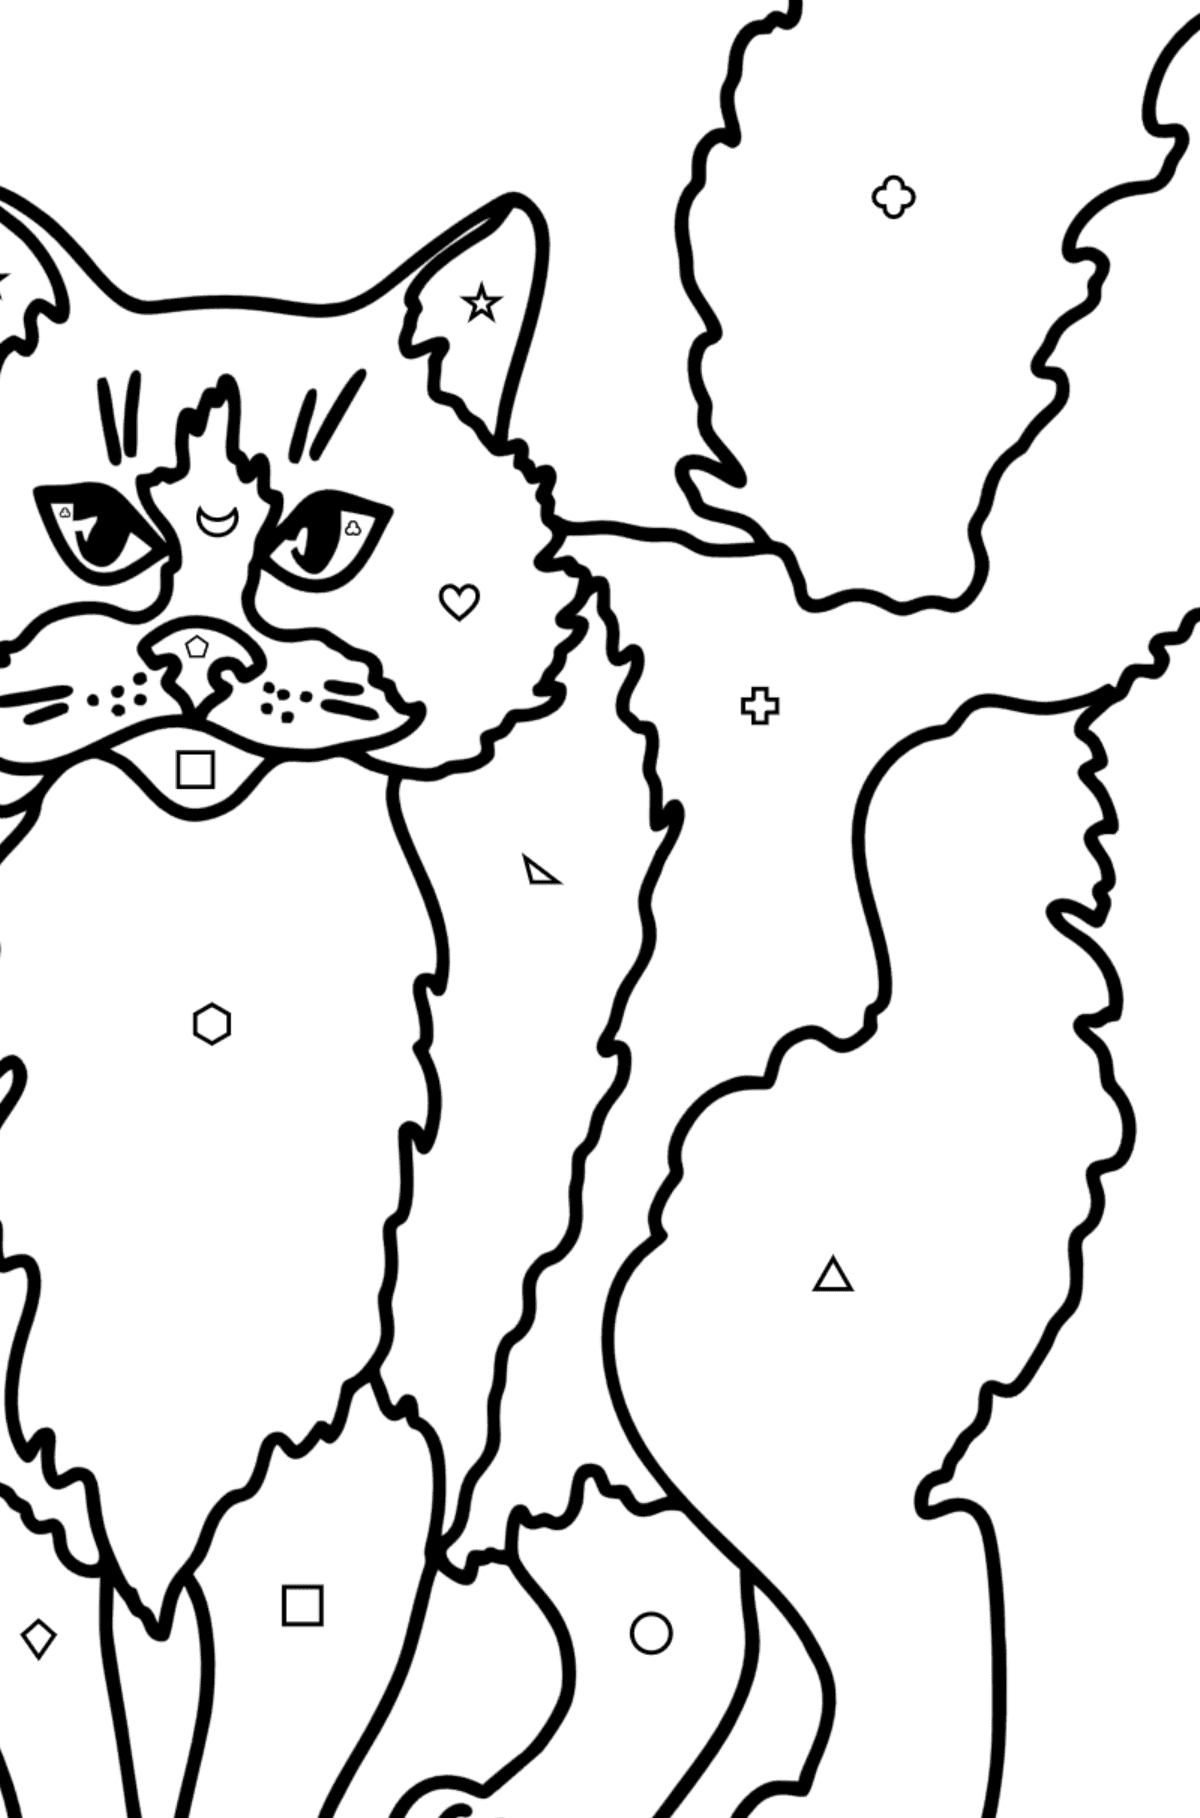 Ragdoll Cat coloring page - Coloring by Geometric Shapes for Kids